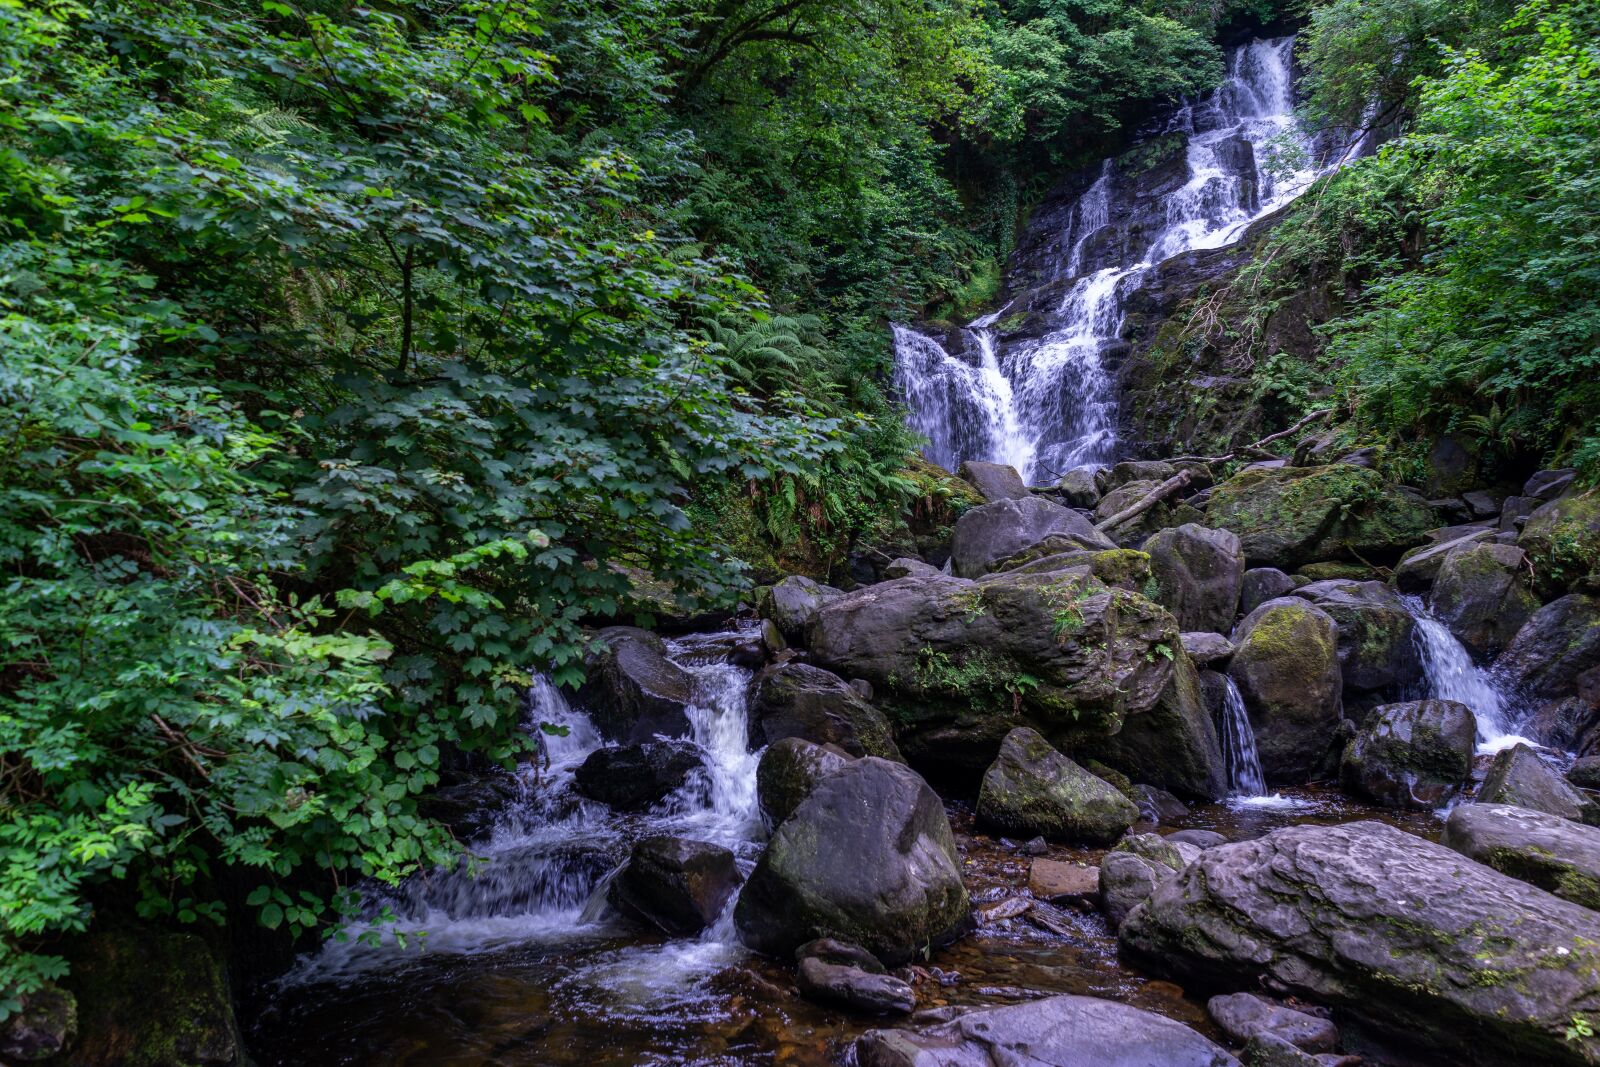 Sony a7 sample photo. Torc waterfall, waterfall, nature photography